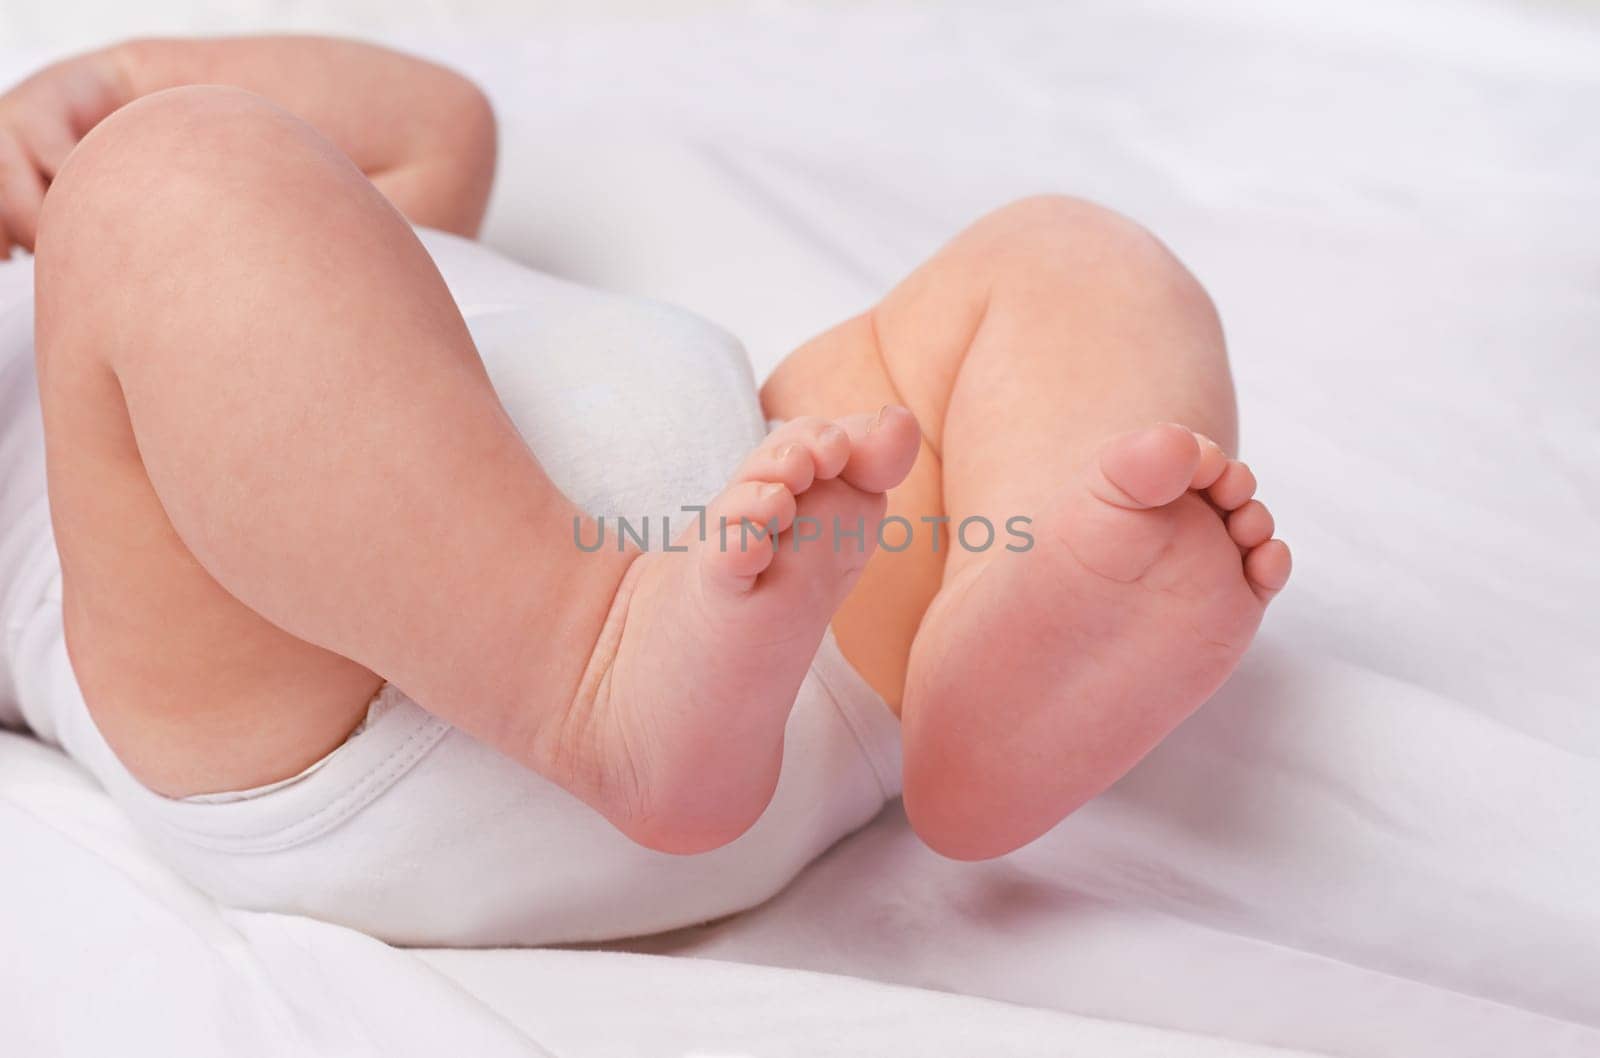 Closeup, newborn baby or feet for relax, bed and nap for healthy childhood, care and development. Bare foot, leg and toes of young child for calm, rest and sleeping in peaceful nursery for dreaming by YuriArcurs